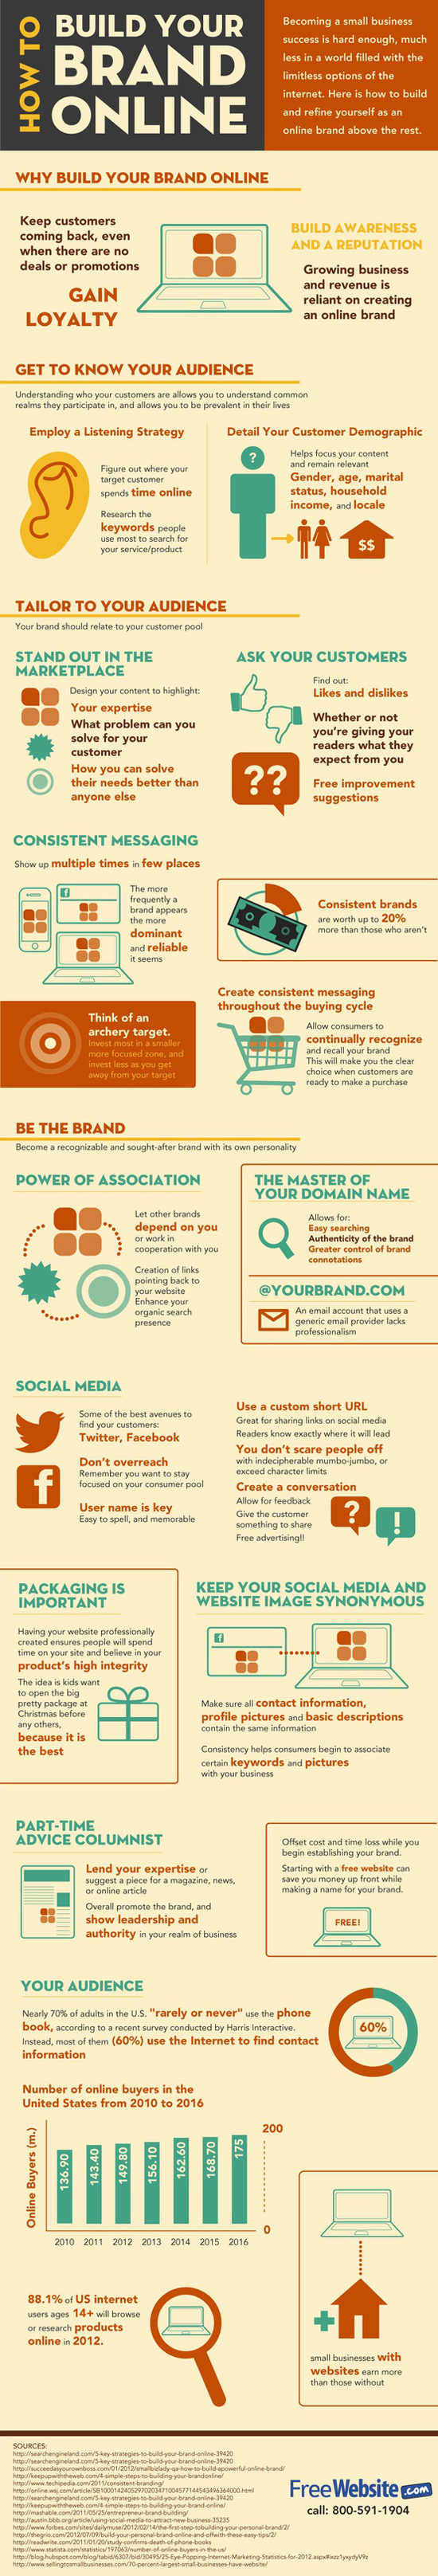 how-to-build-your-brand-online